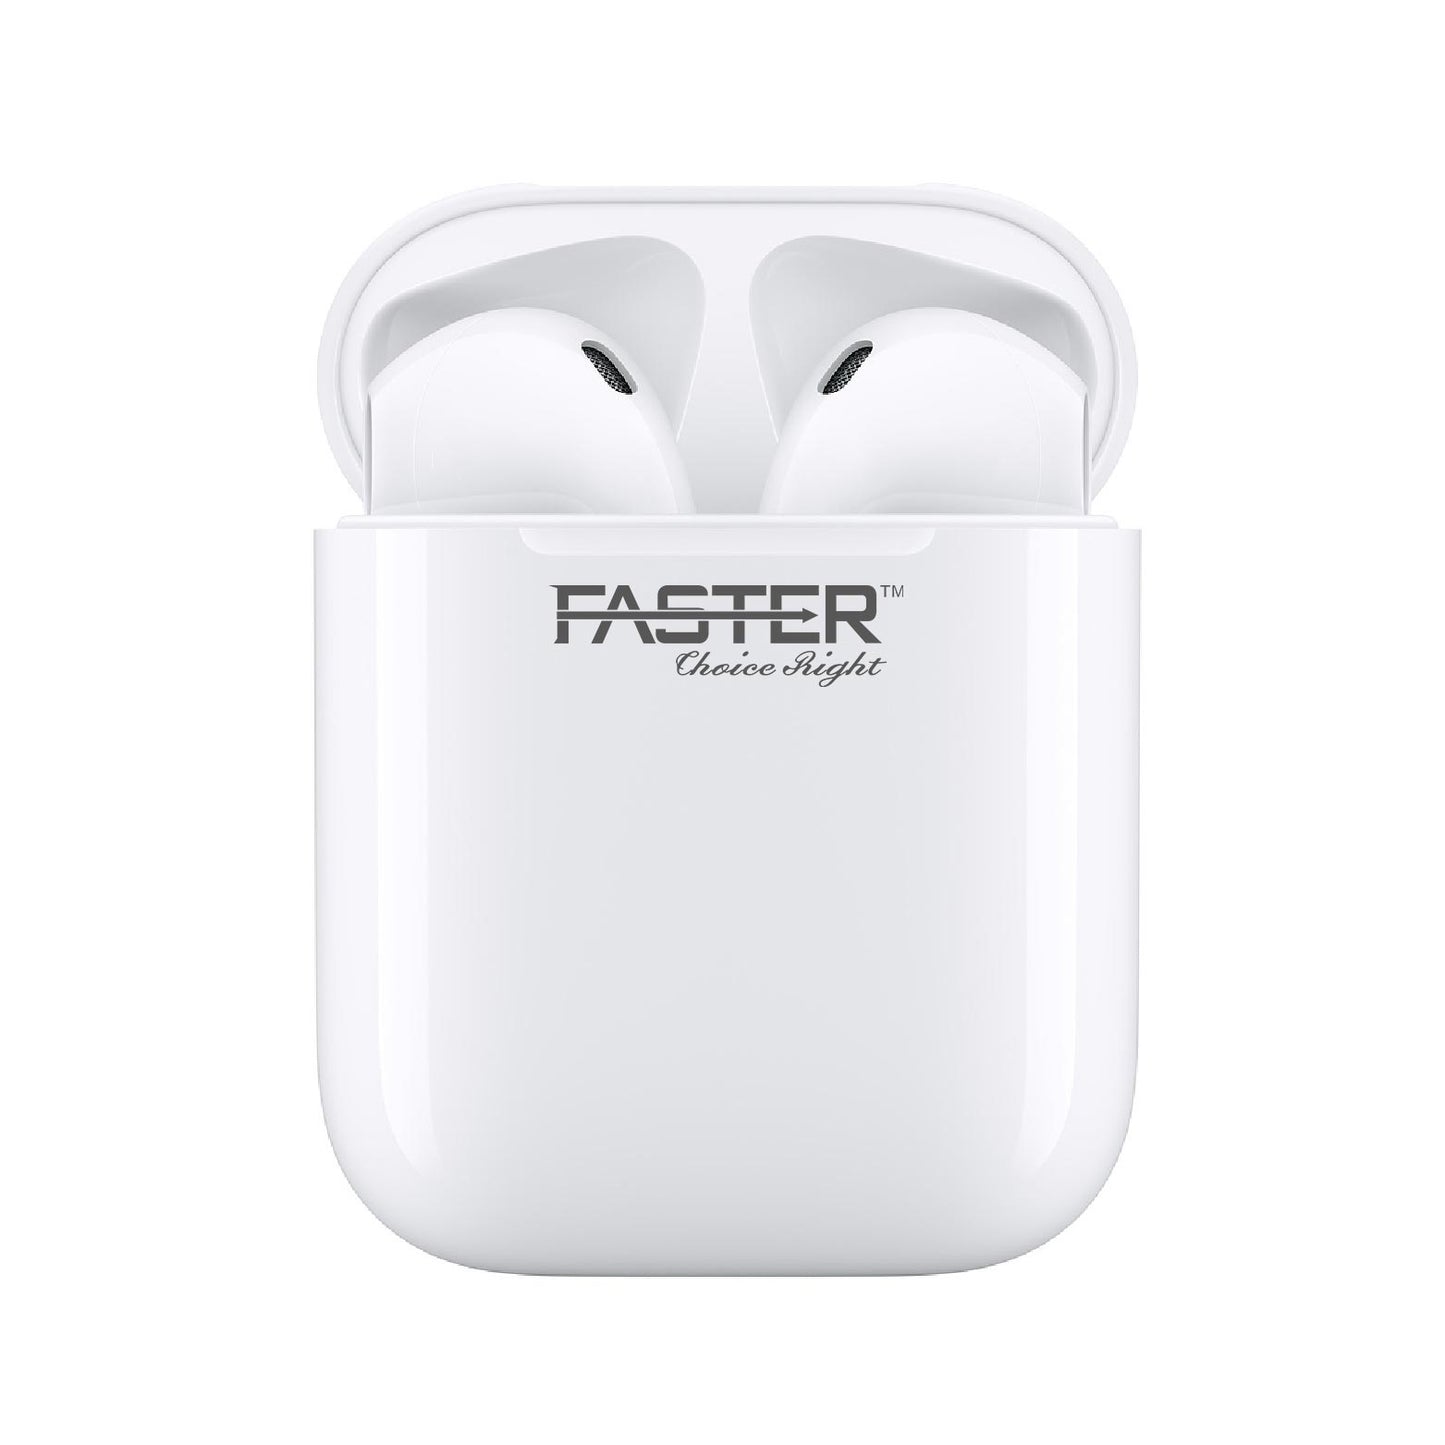 Faster Stereo Bass Sound TWS Wireless Earbuds Price in Pakistan 